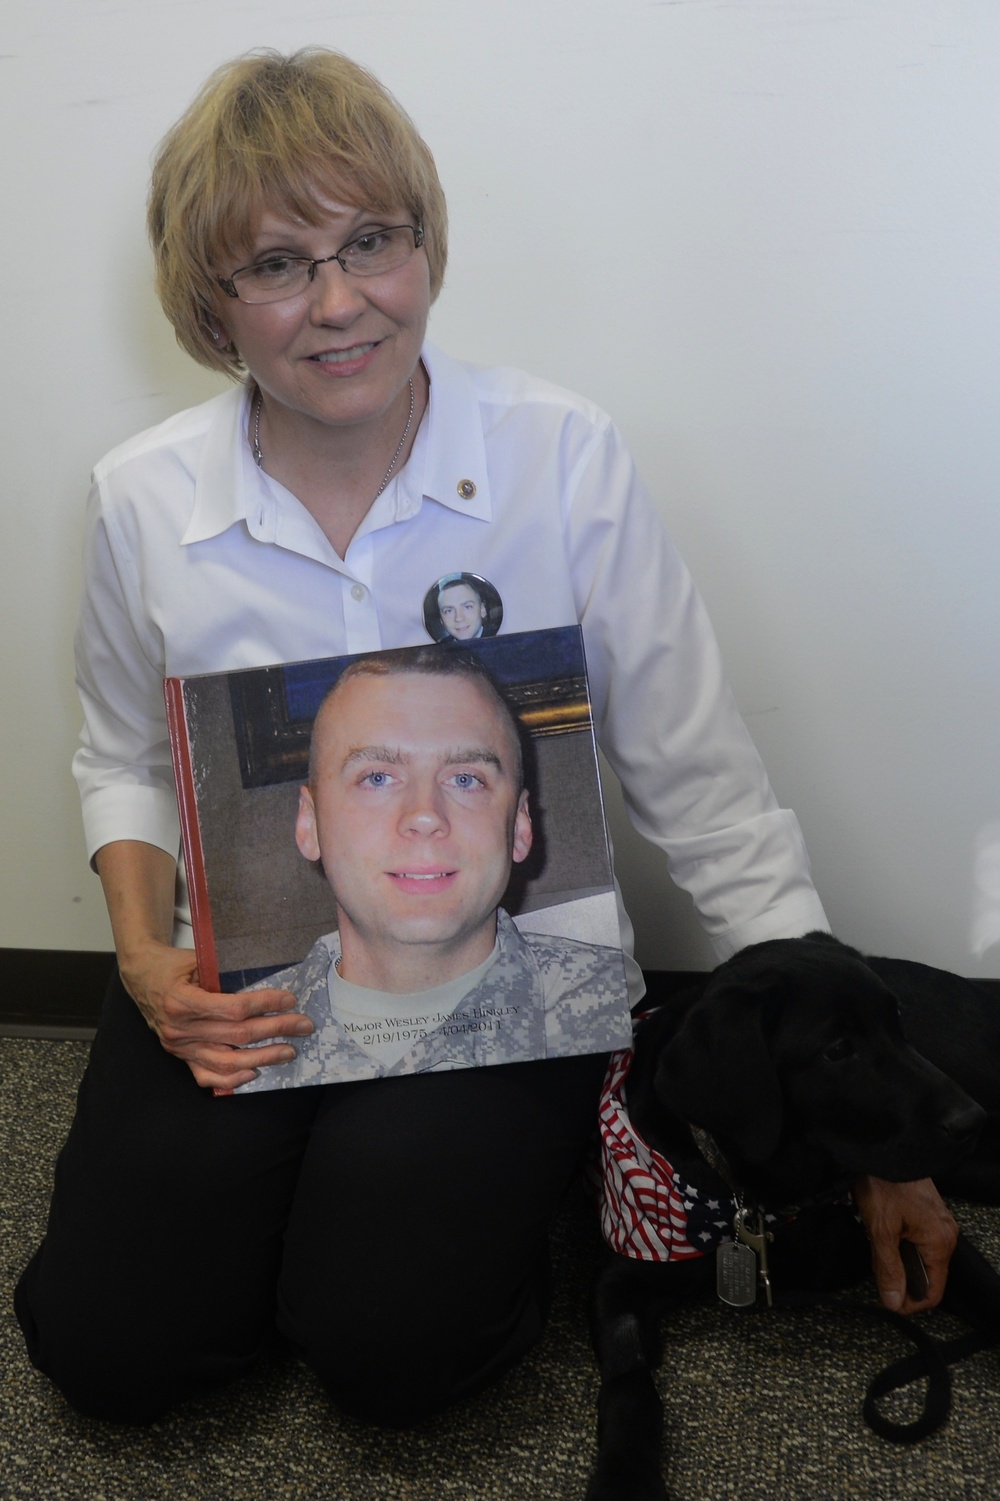 Gold Star Mother sponsors service dog, honors son’s service